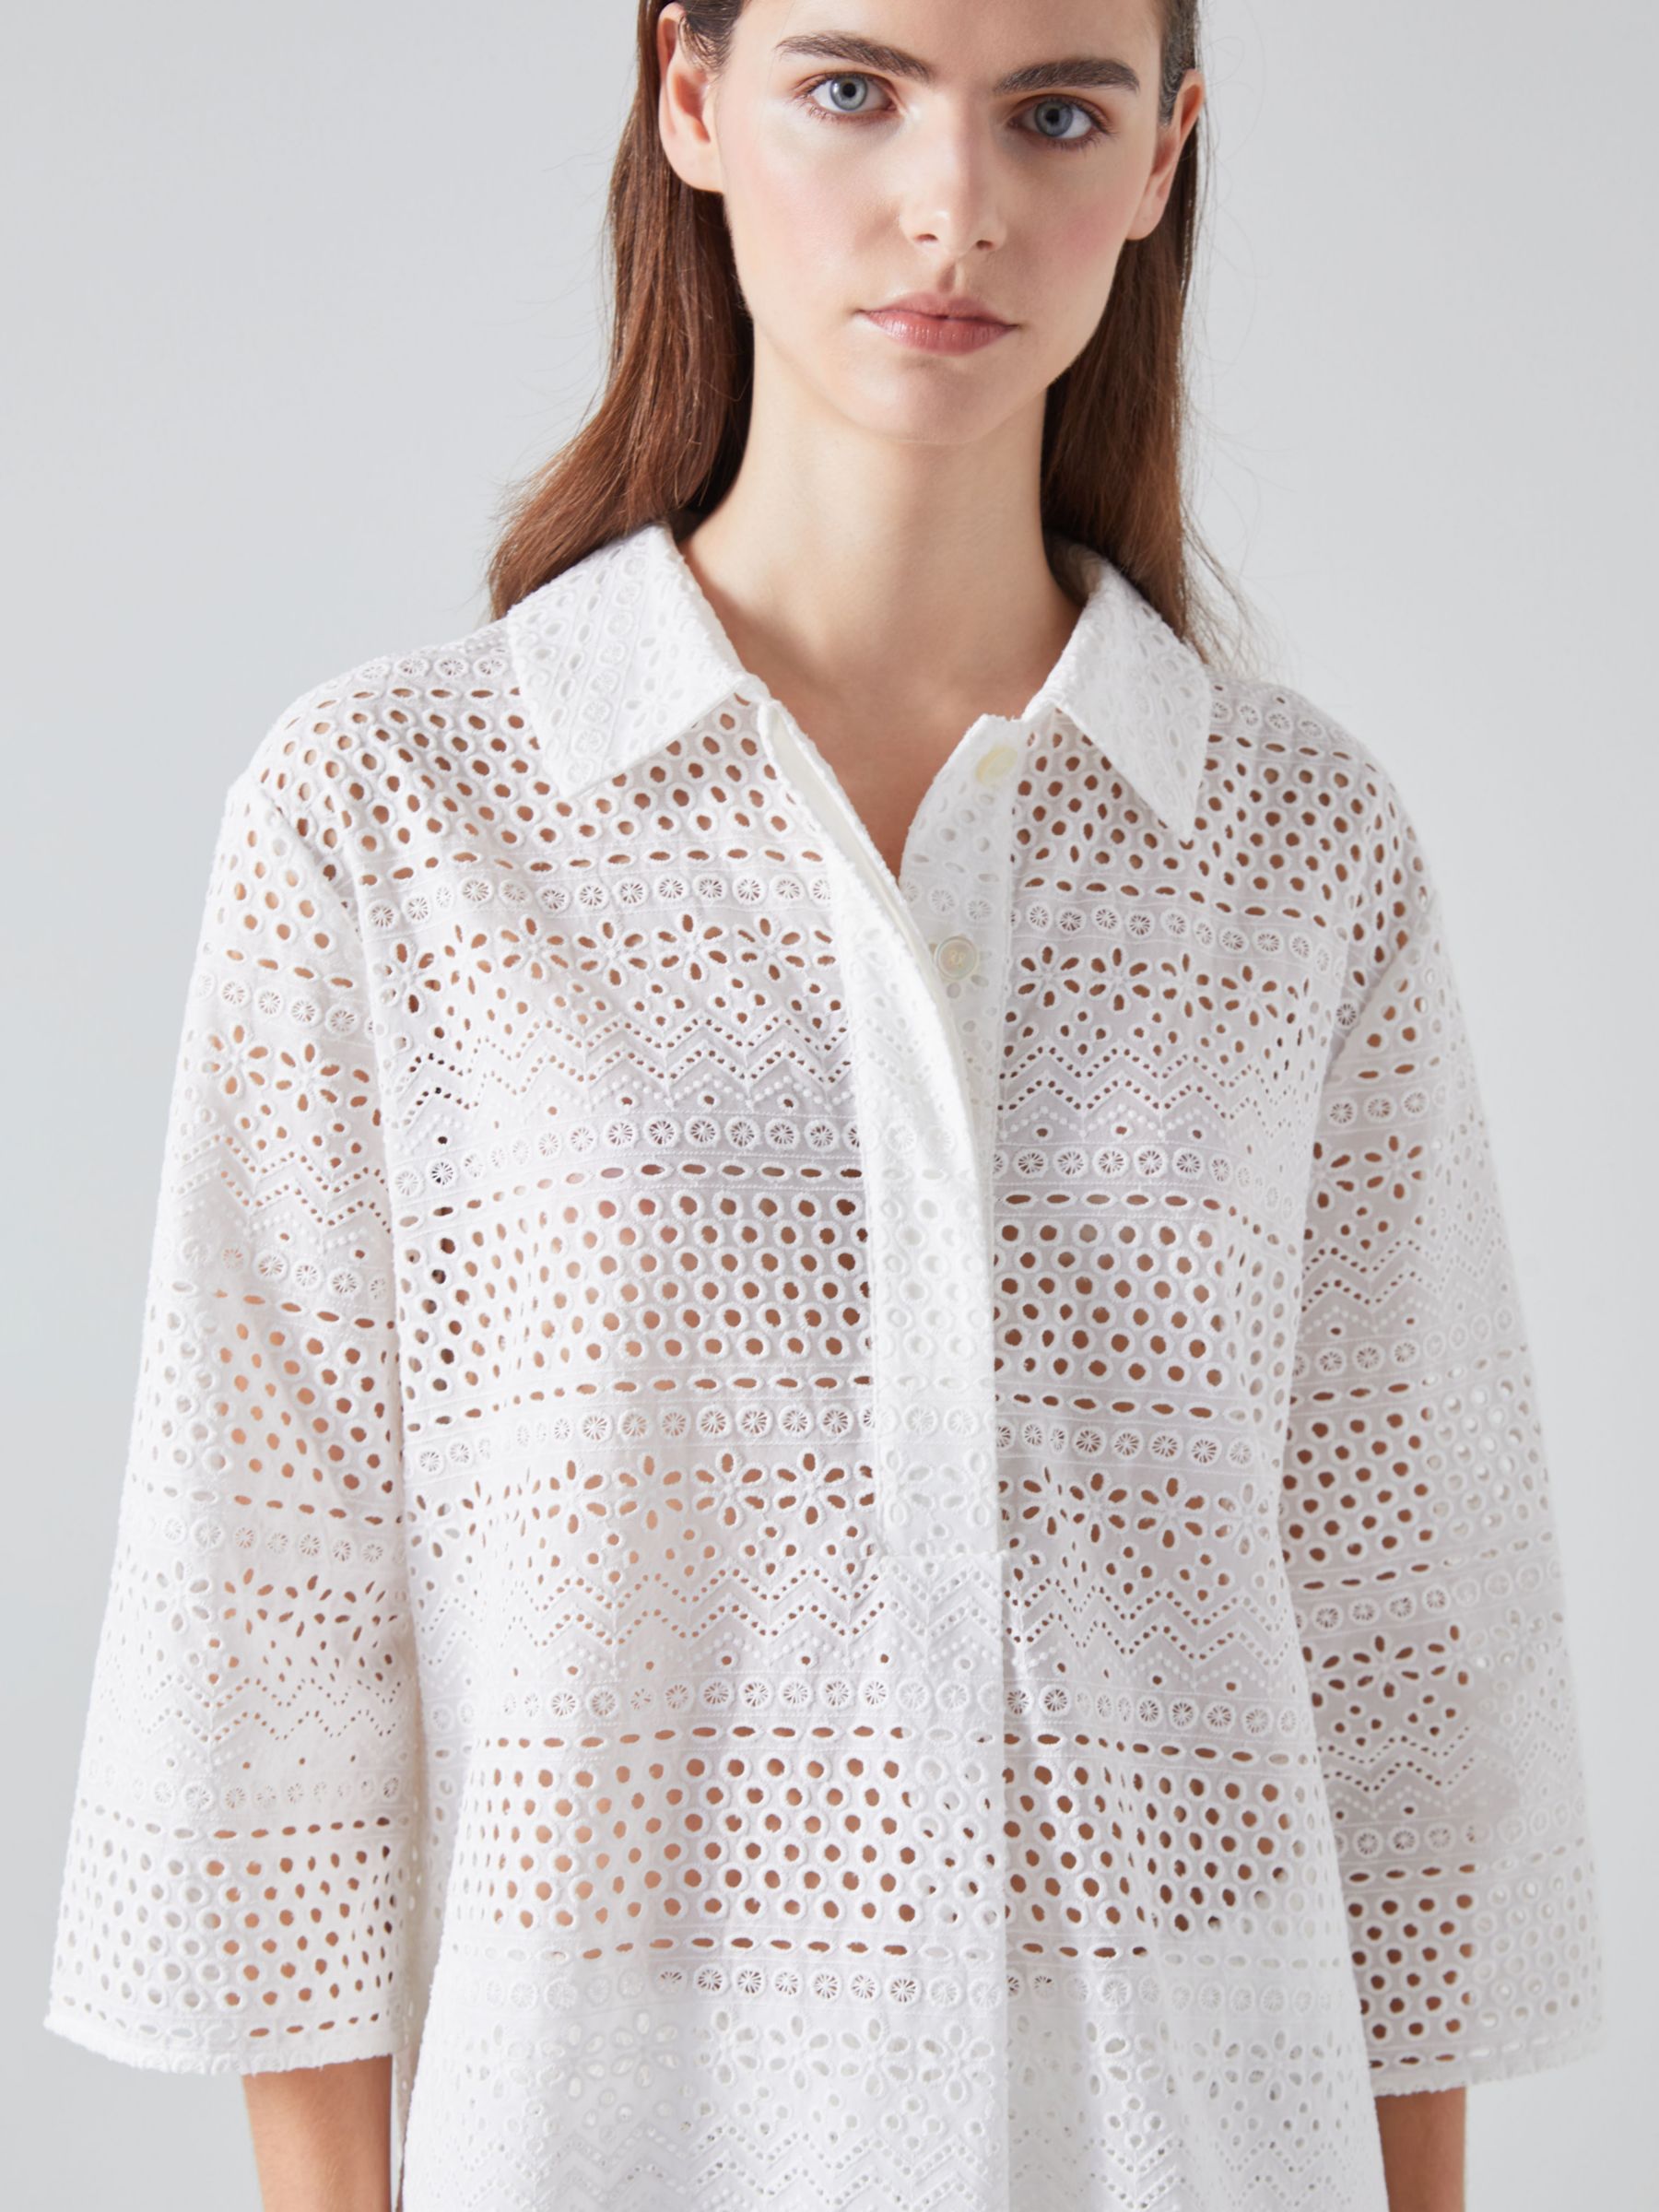 L.K.Bennett Edie Broderie Anglaise Relaxed Fit Shirt, White, 6